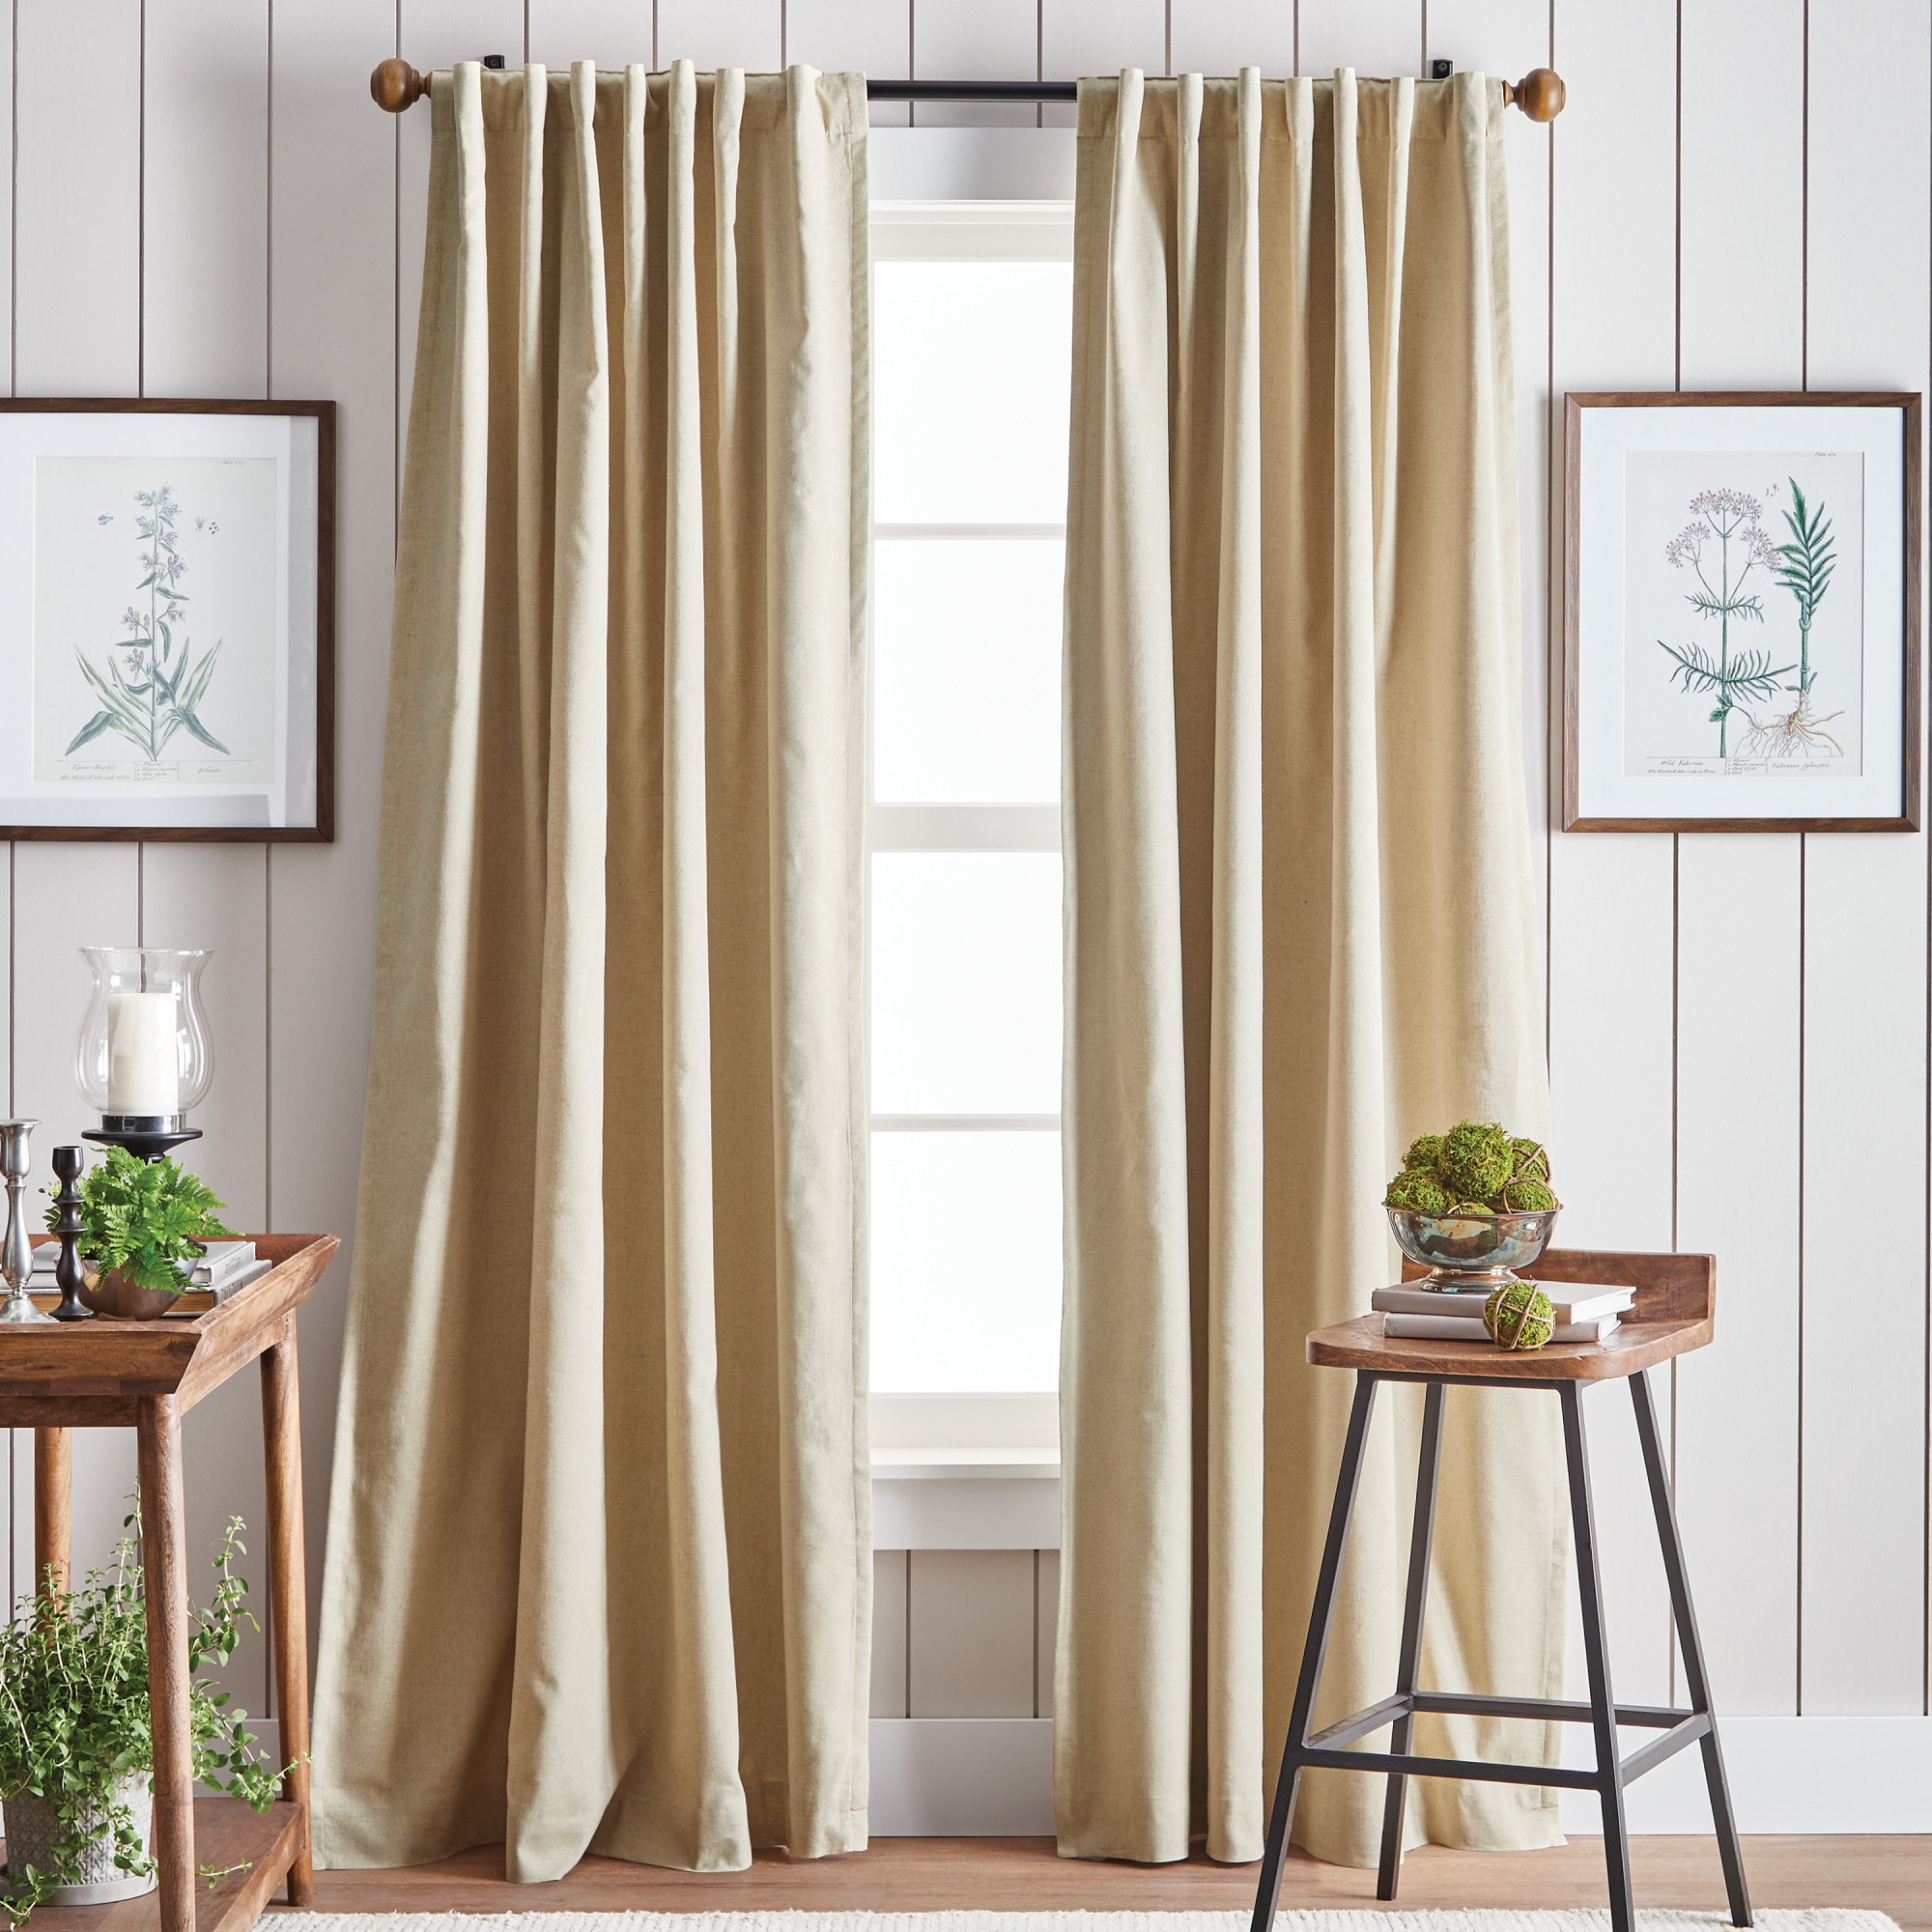 2x Tresil Linen-Blend Curtain Drapes Window Panel Home Household Floral Green 